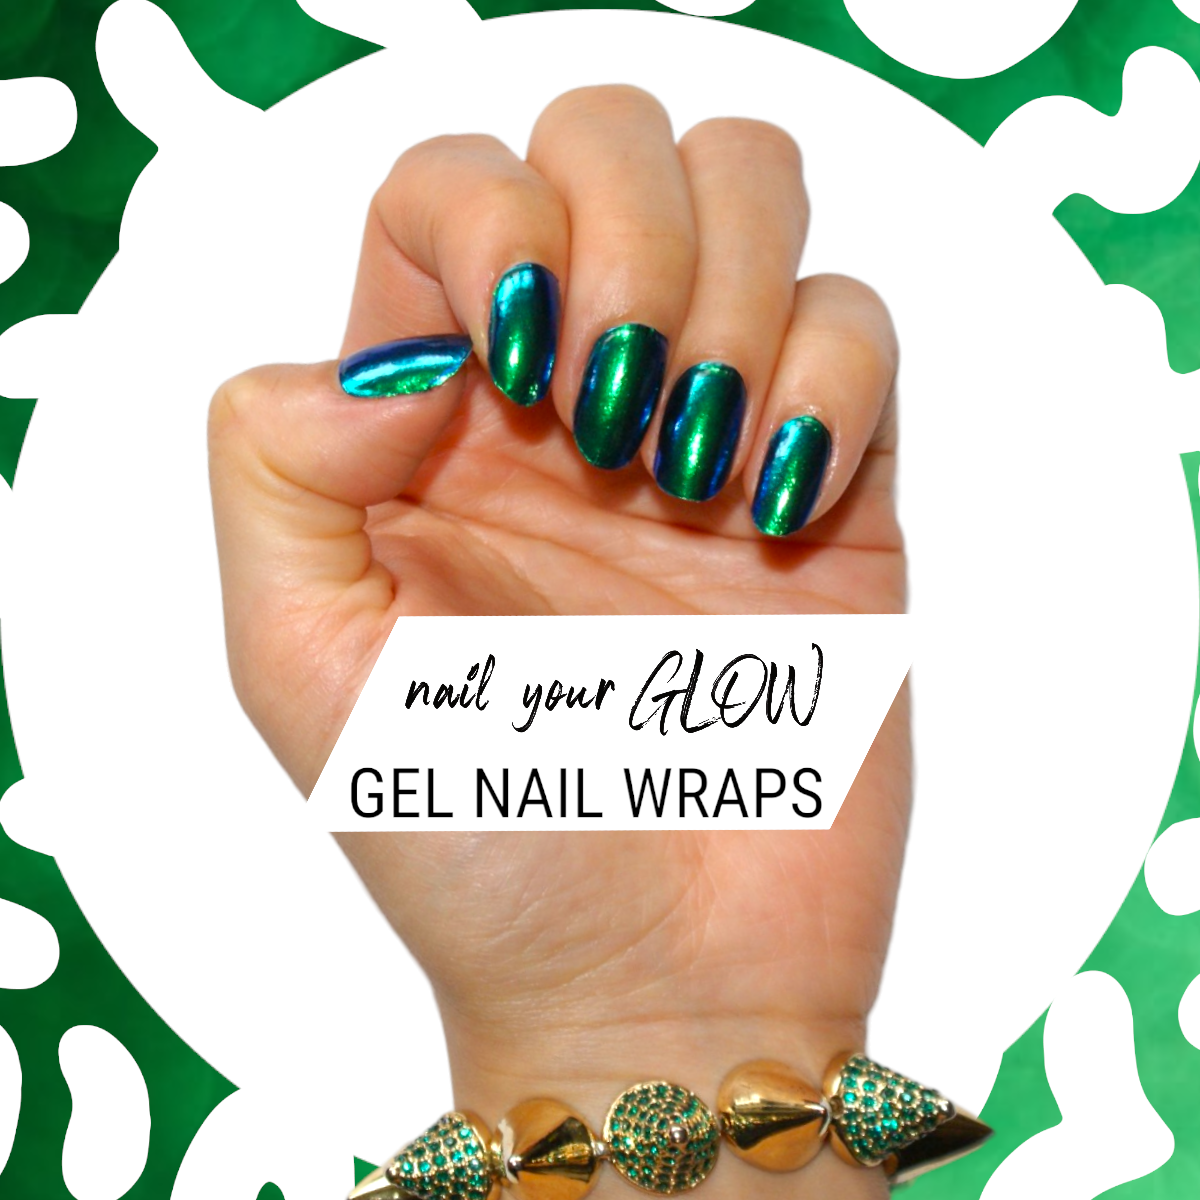 YOUR DISCO NEEDS YOU - 20 Gel Nail Wraps by Nail Your GLOW (Green Chrome)